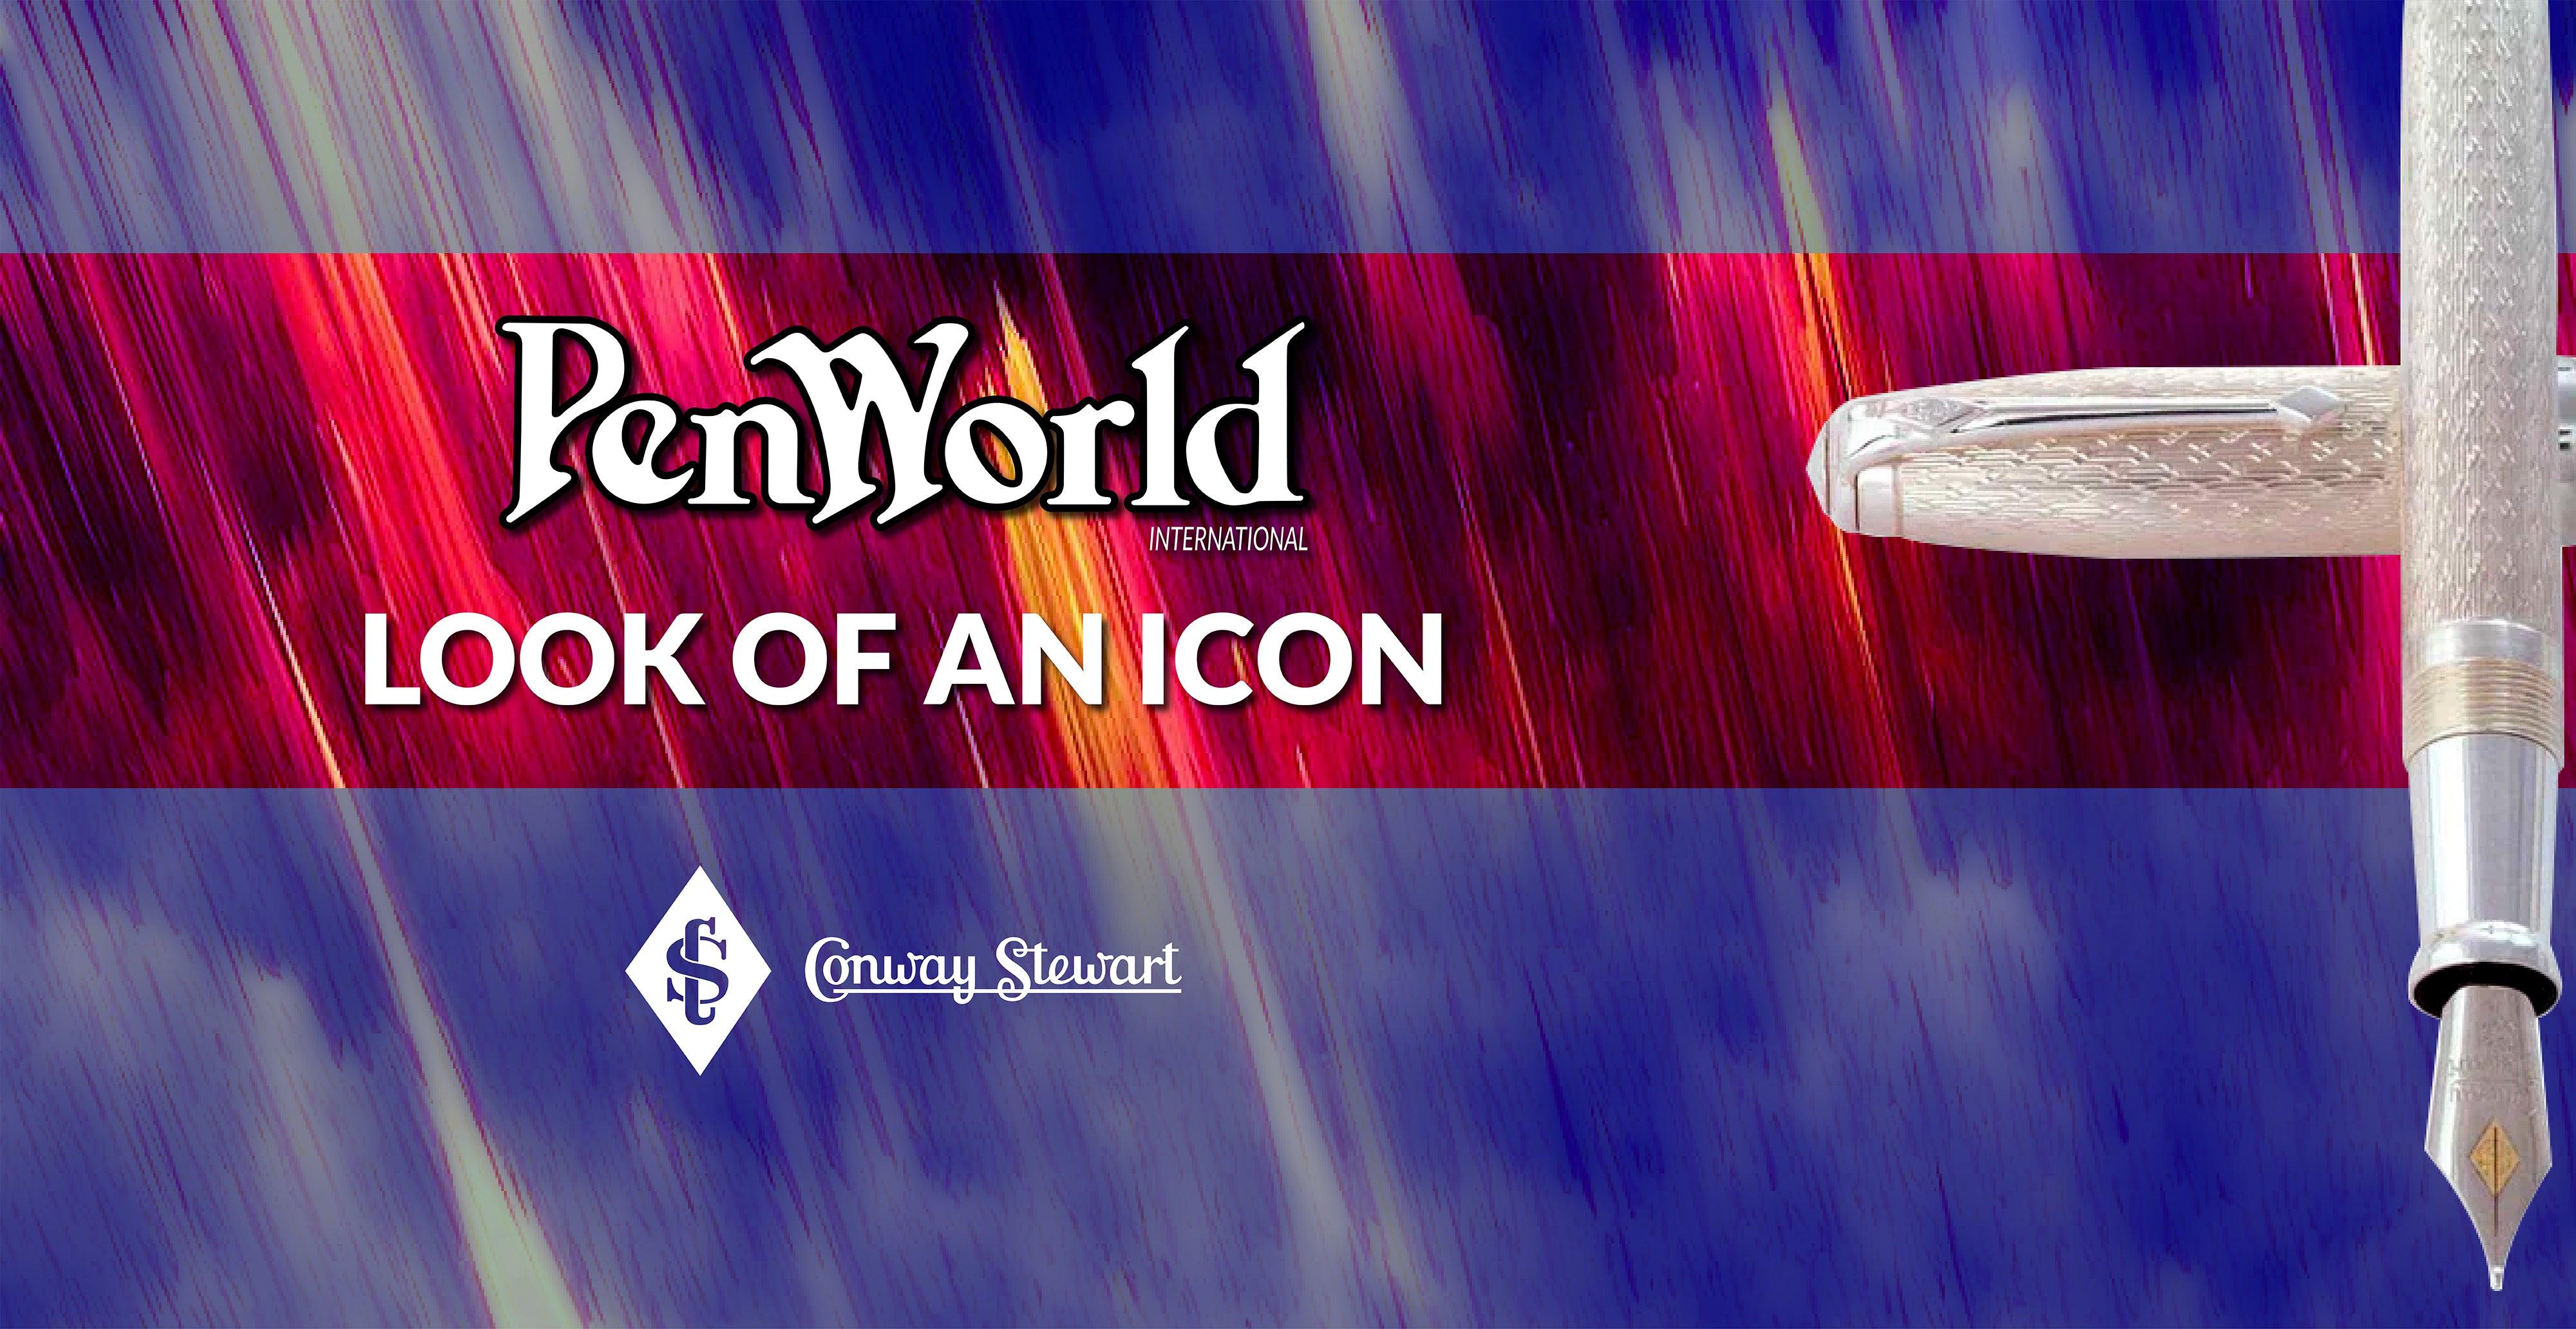 Pen World - Look of an Icon, 2008 - Conway Stewart